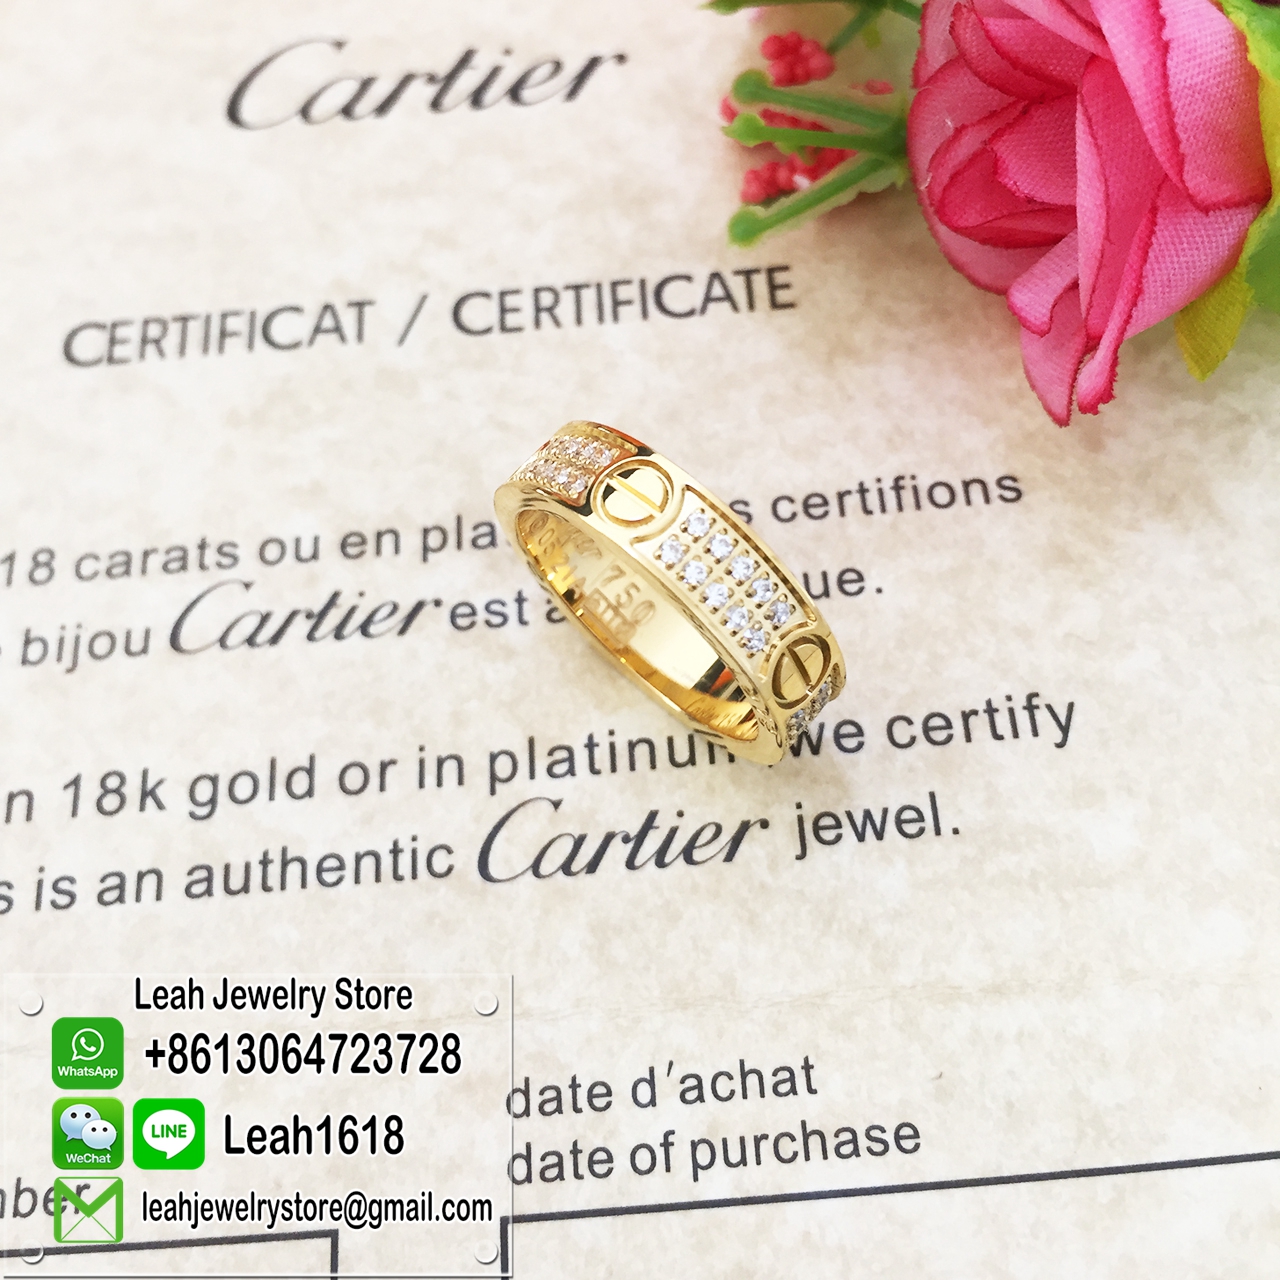 leah jewelry store cartier